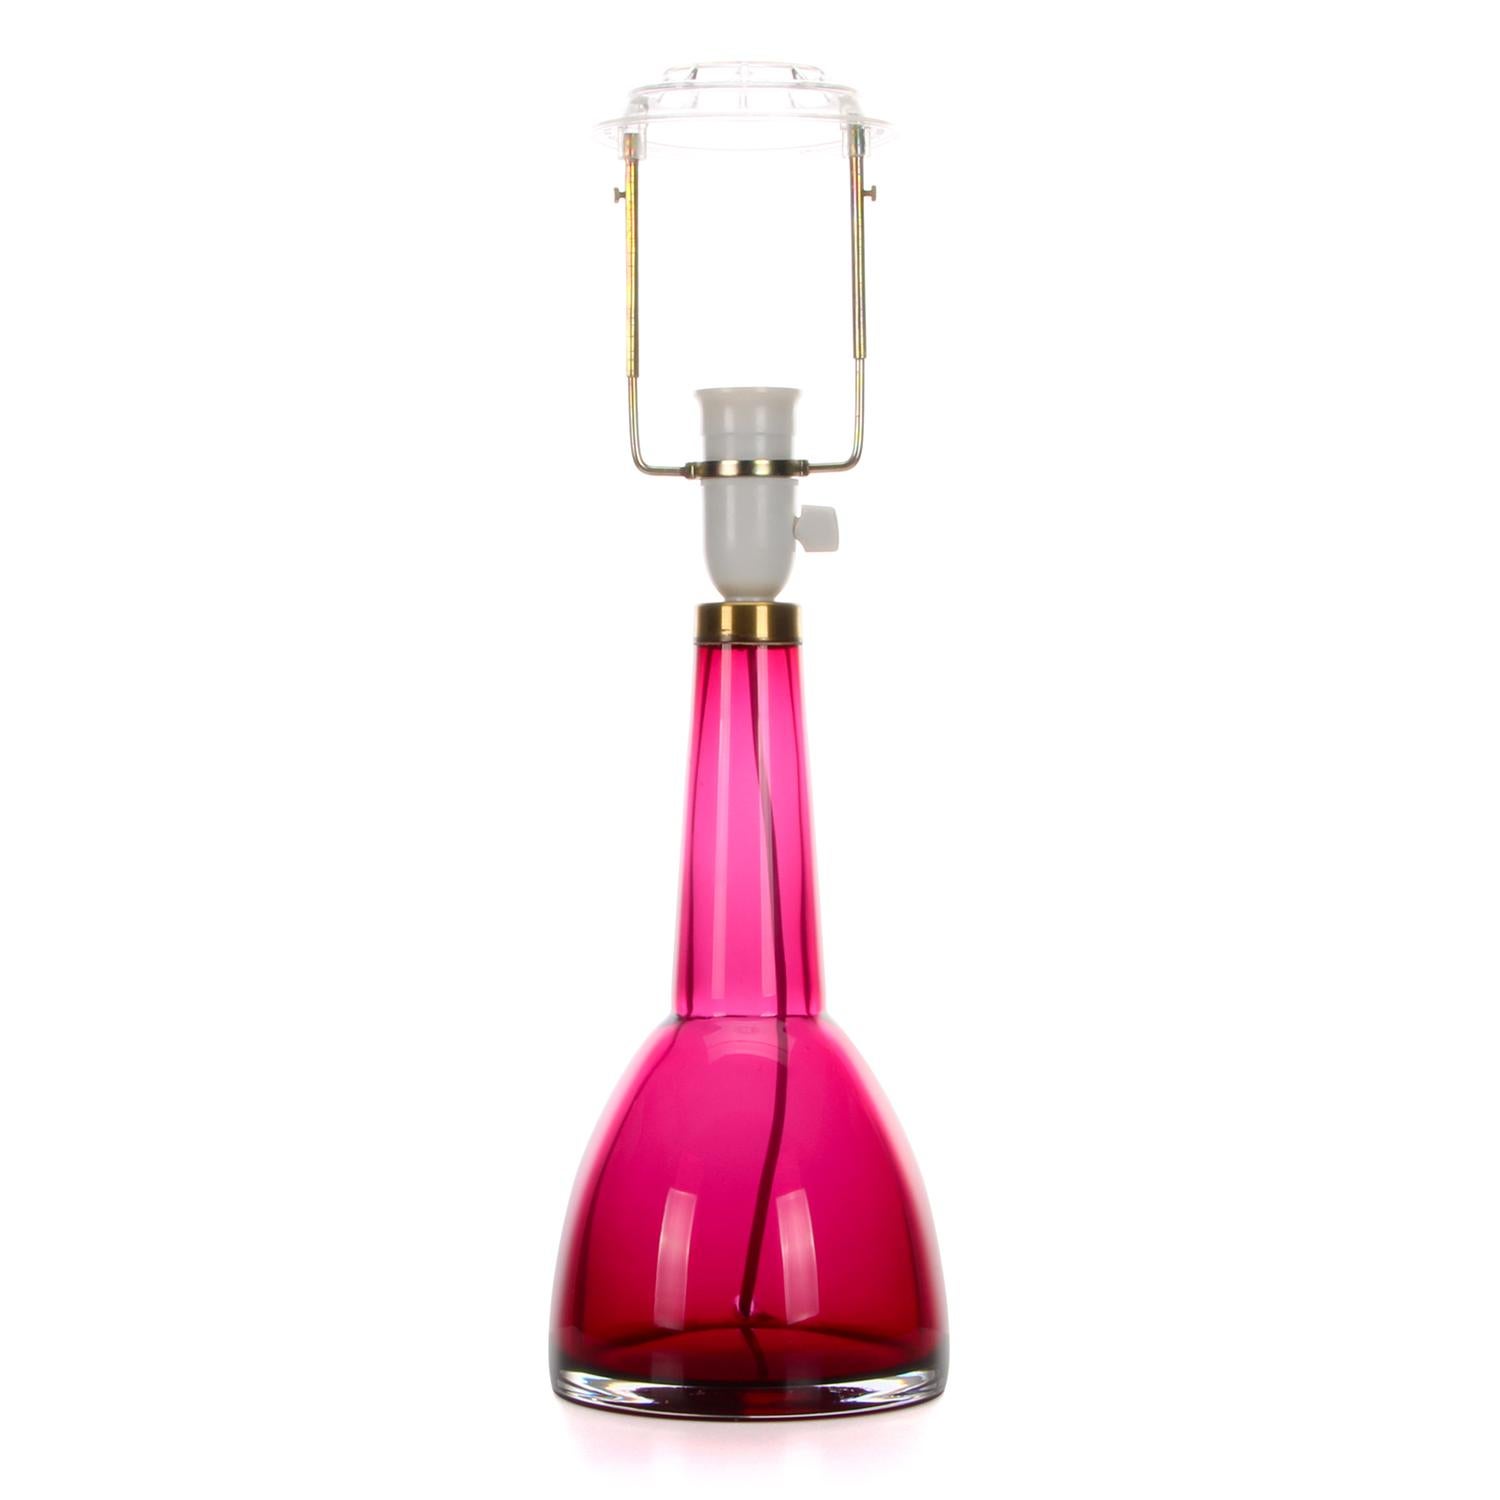 Mid-20th Century Orrefors Table Lamp 1960s Pink Glass Table Lamp Including Vintage Textile Shade